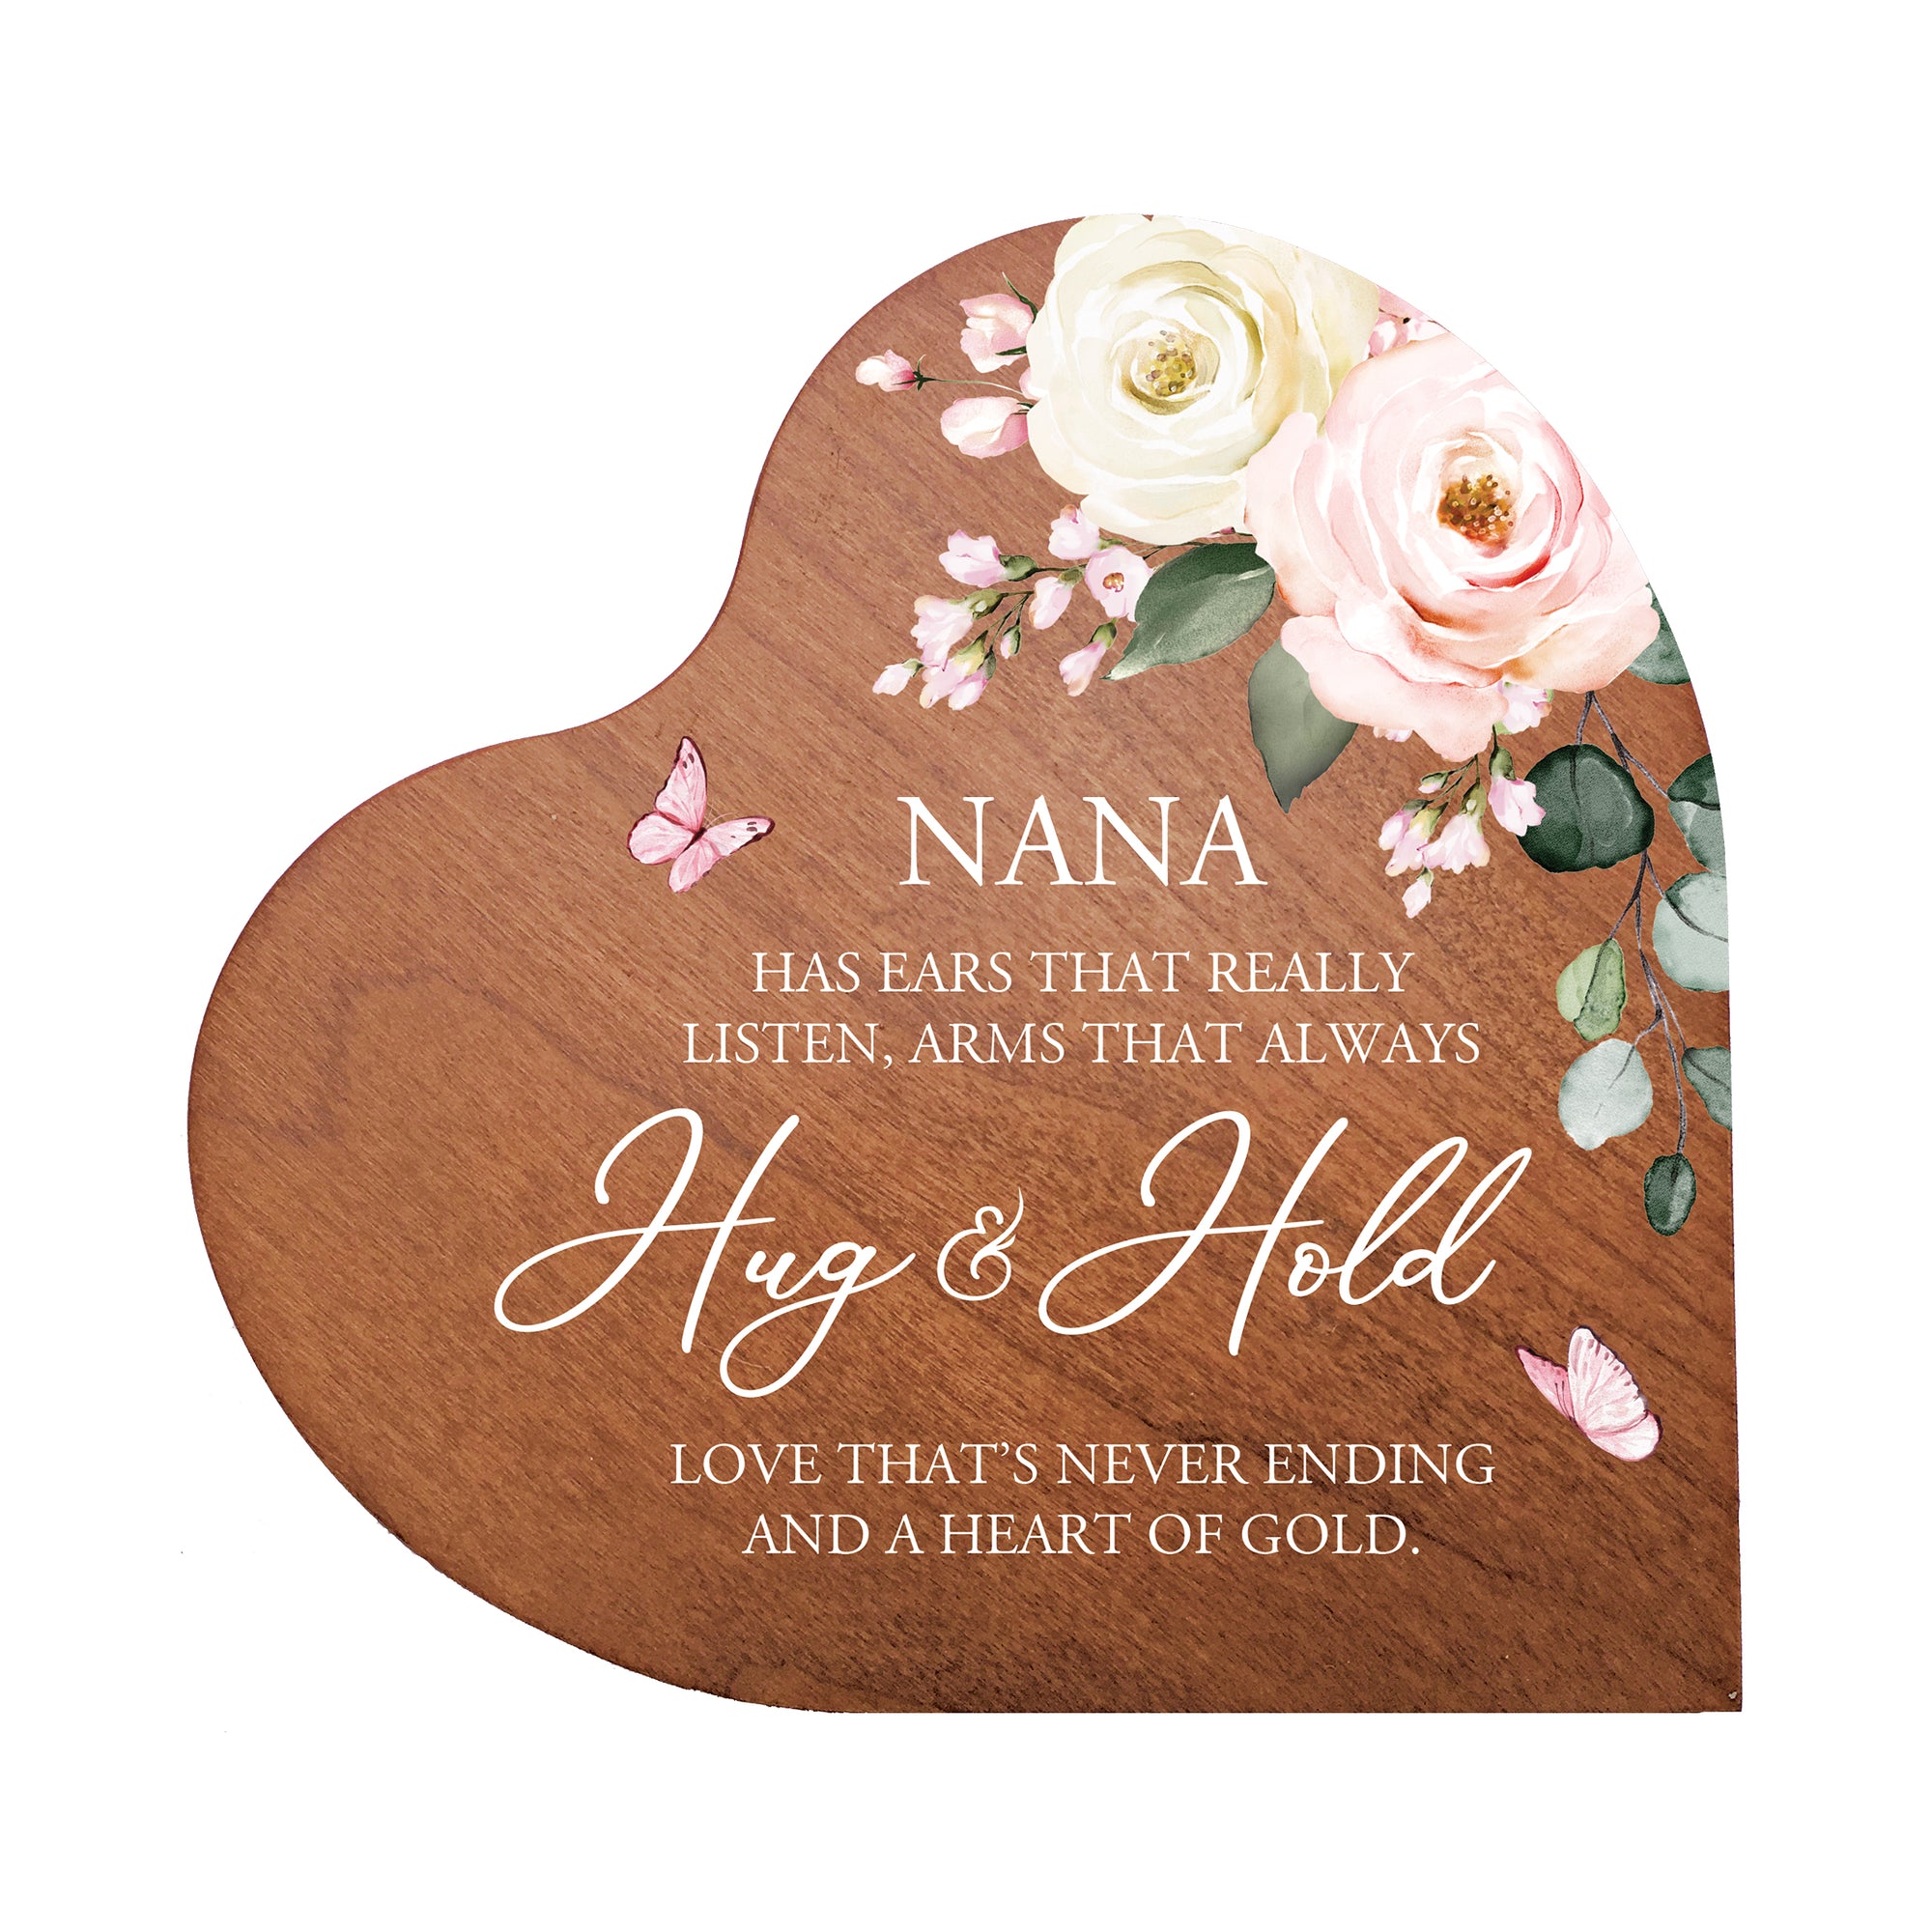 Lifesong Milestones Unique Grandmother’s Love Heart Block- 5in with Inspirational verse - Nana, Hug and Hold. A housewarming keepsake gift to a beloved family member or friend